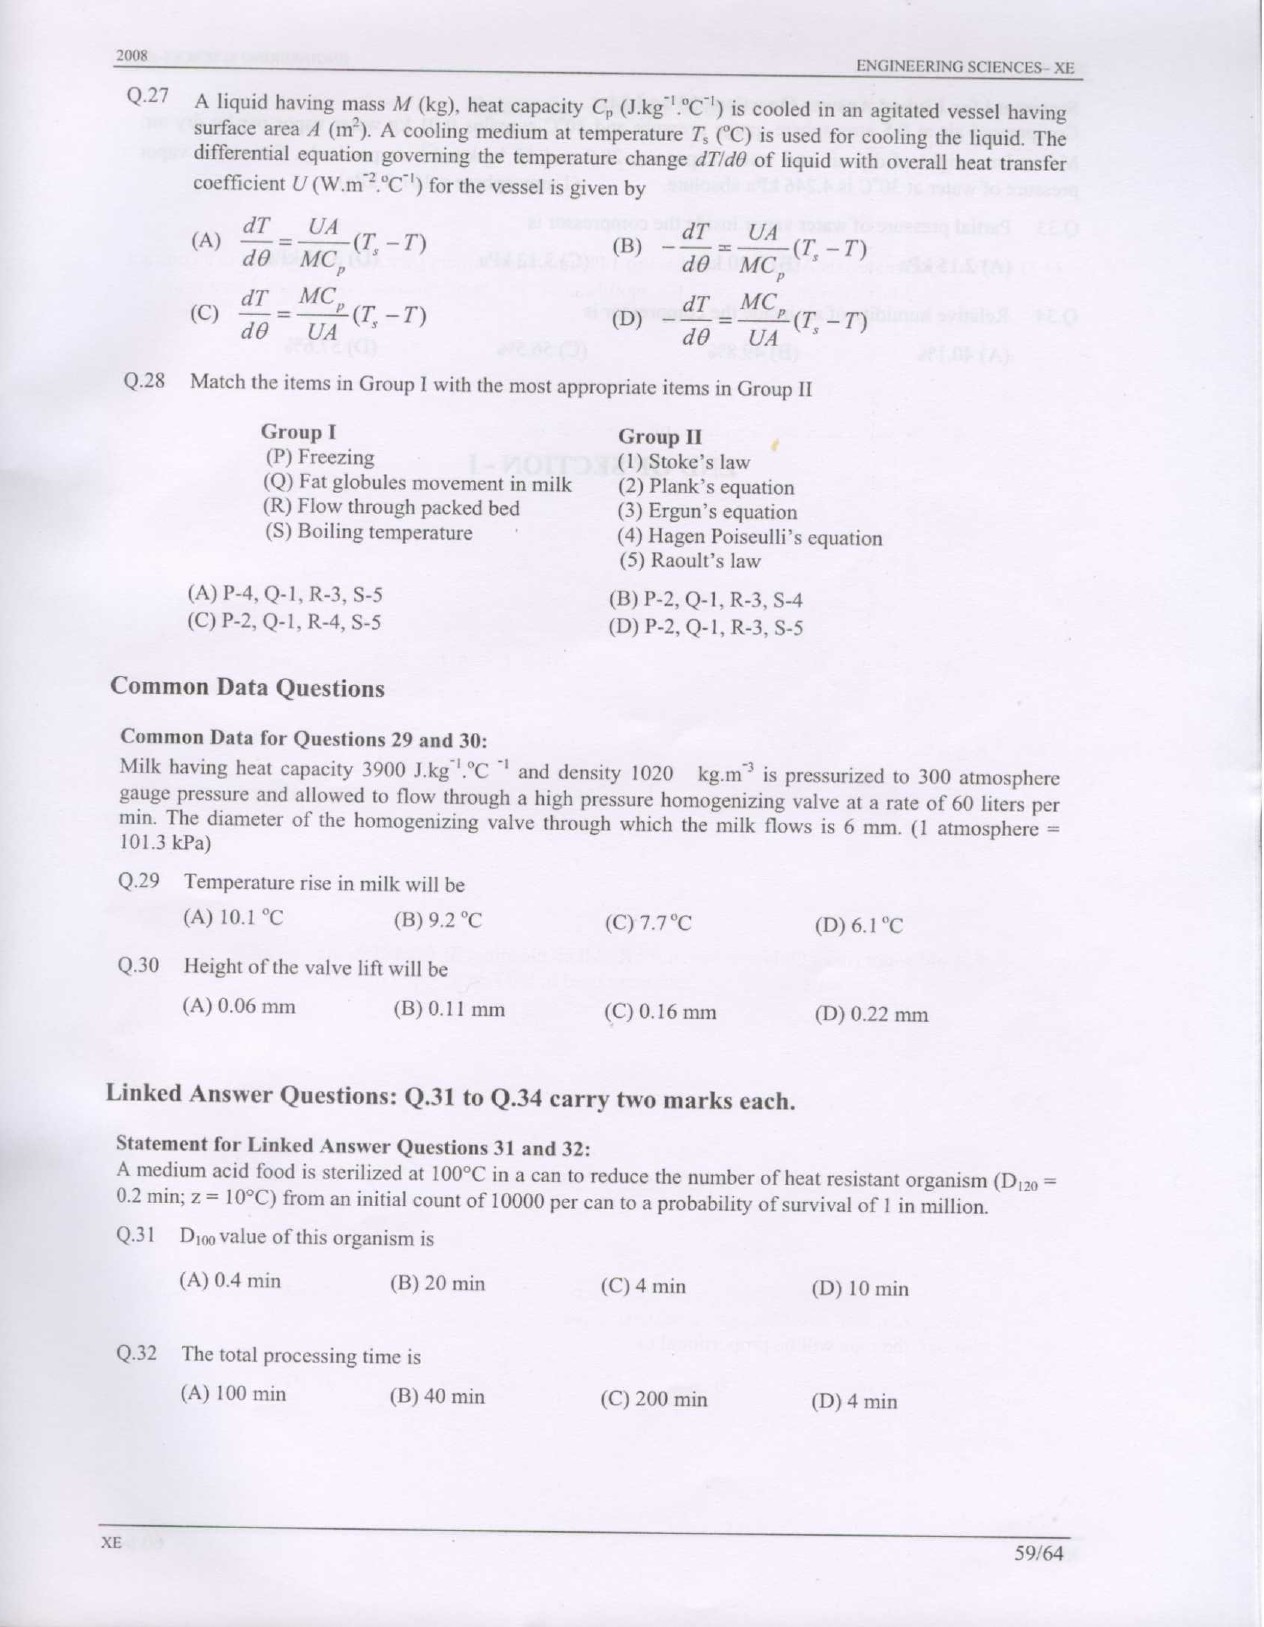 GATE Exam Question Paper 2008 Engineering Sciences 59